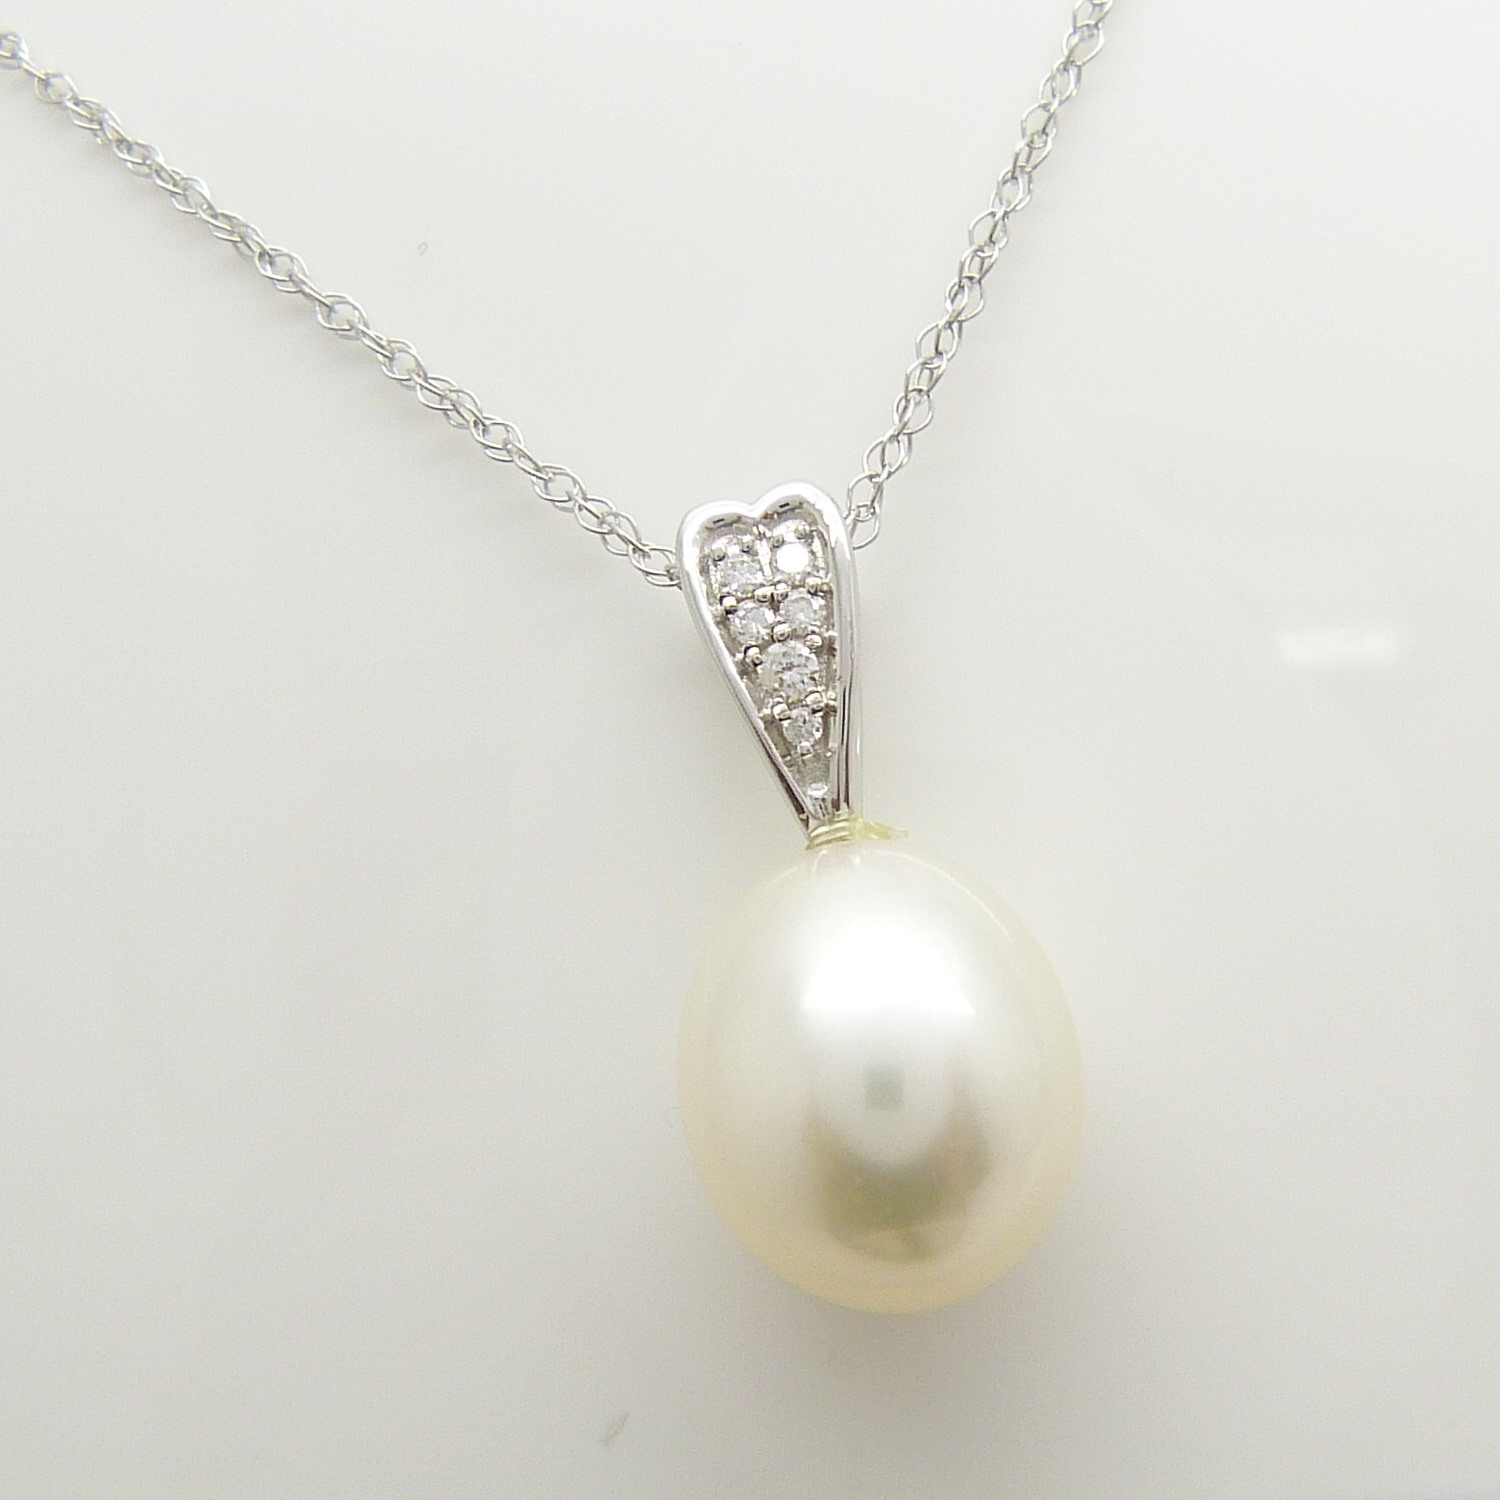 White Gold Necklace. Pendant Features An Oval Cultured Pearl and Diamond-Set Bale